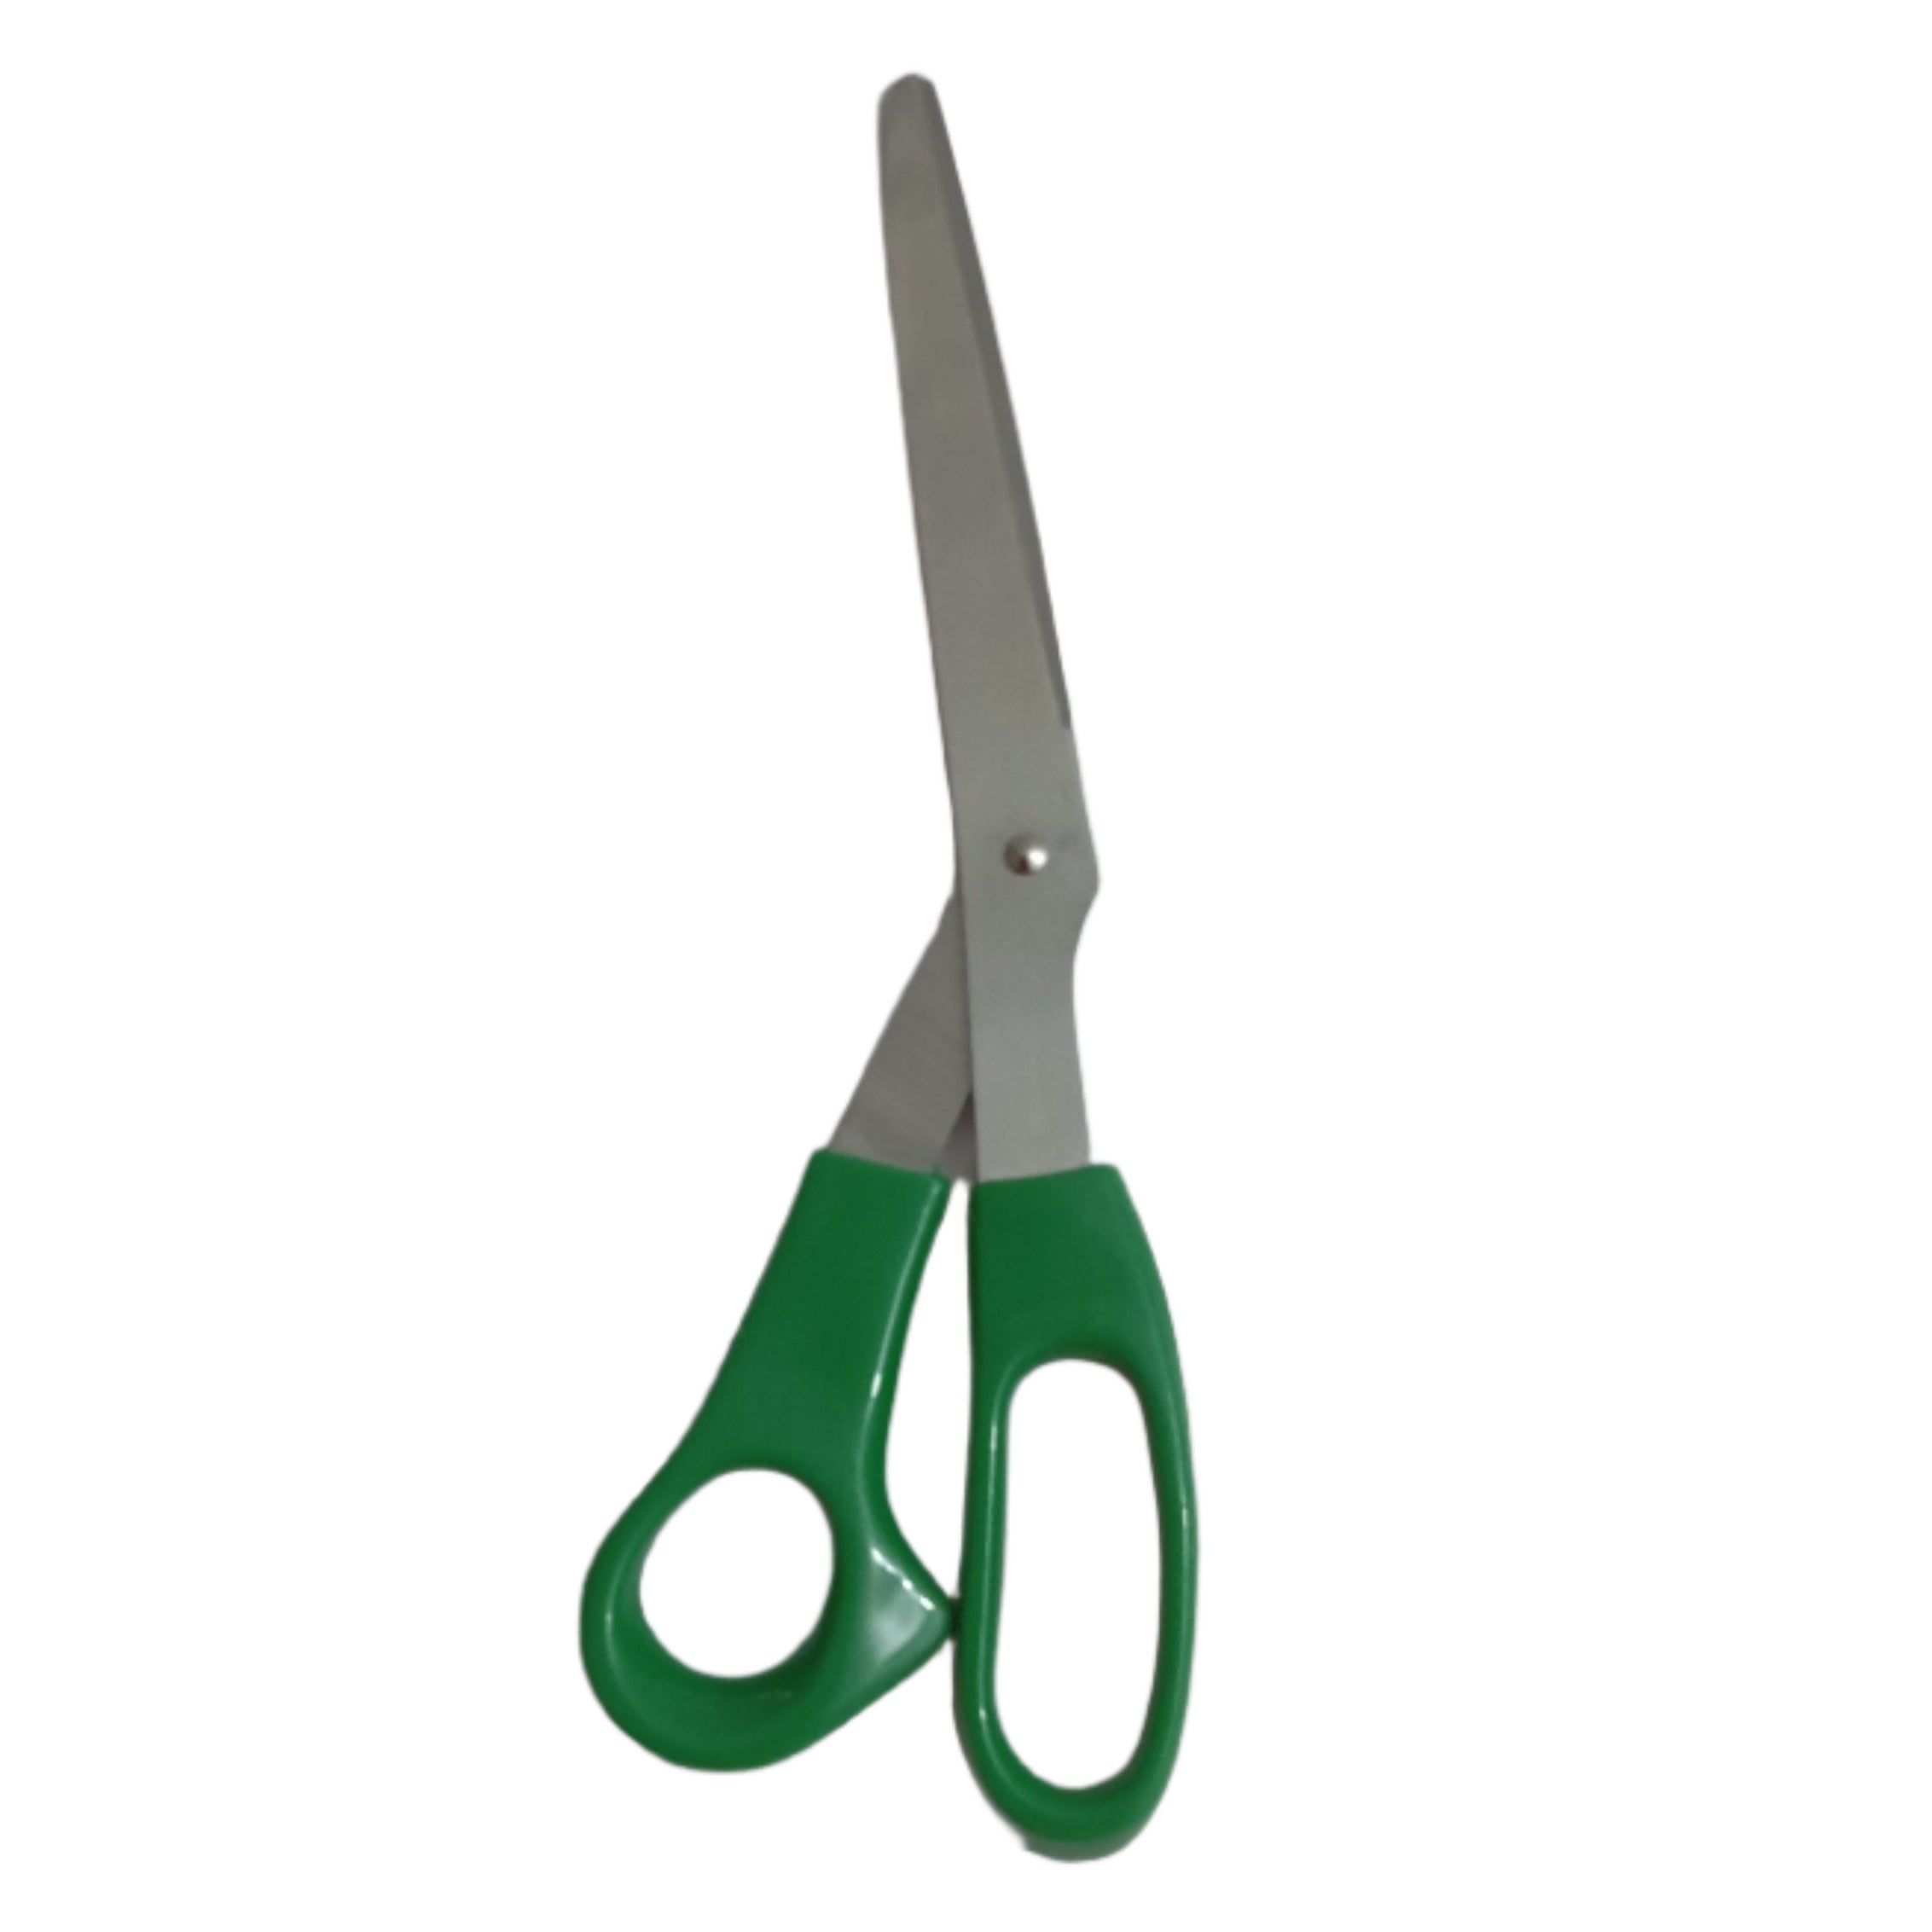 Stainless Steel Scissors Best Quality, Green | OVY14d